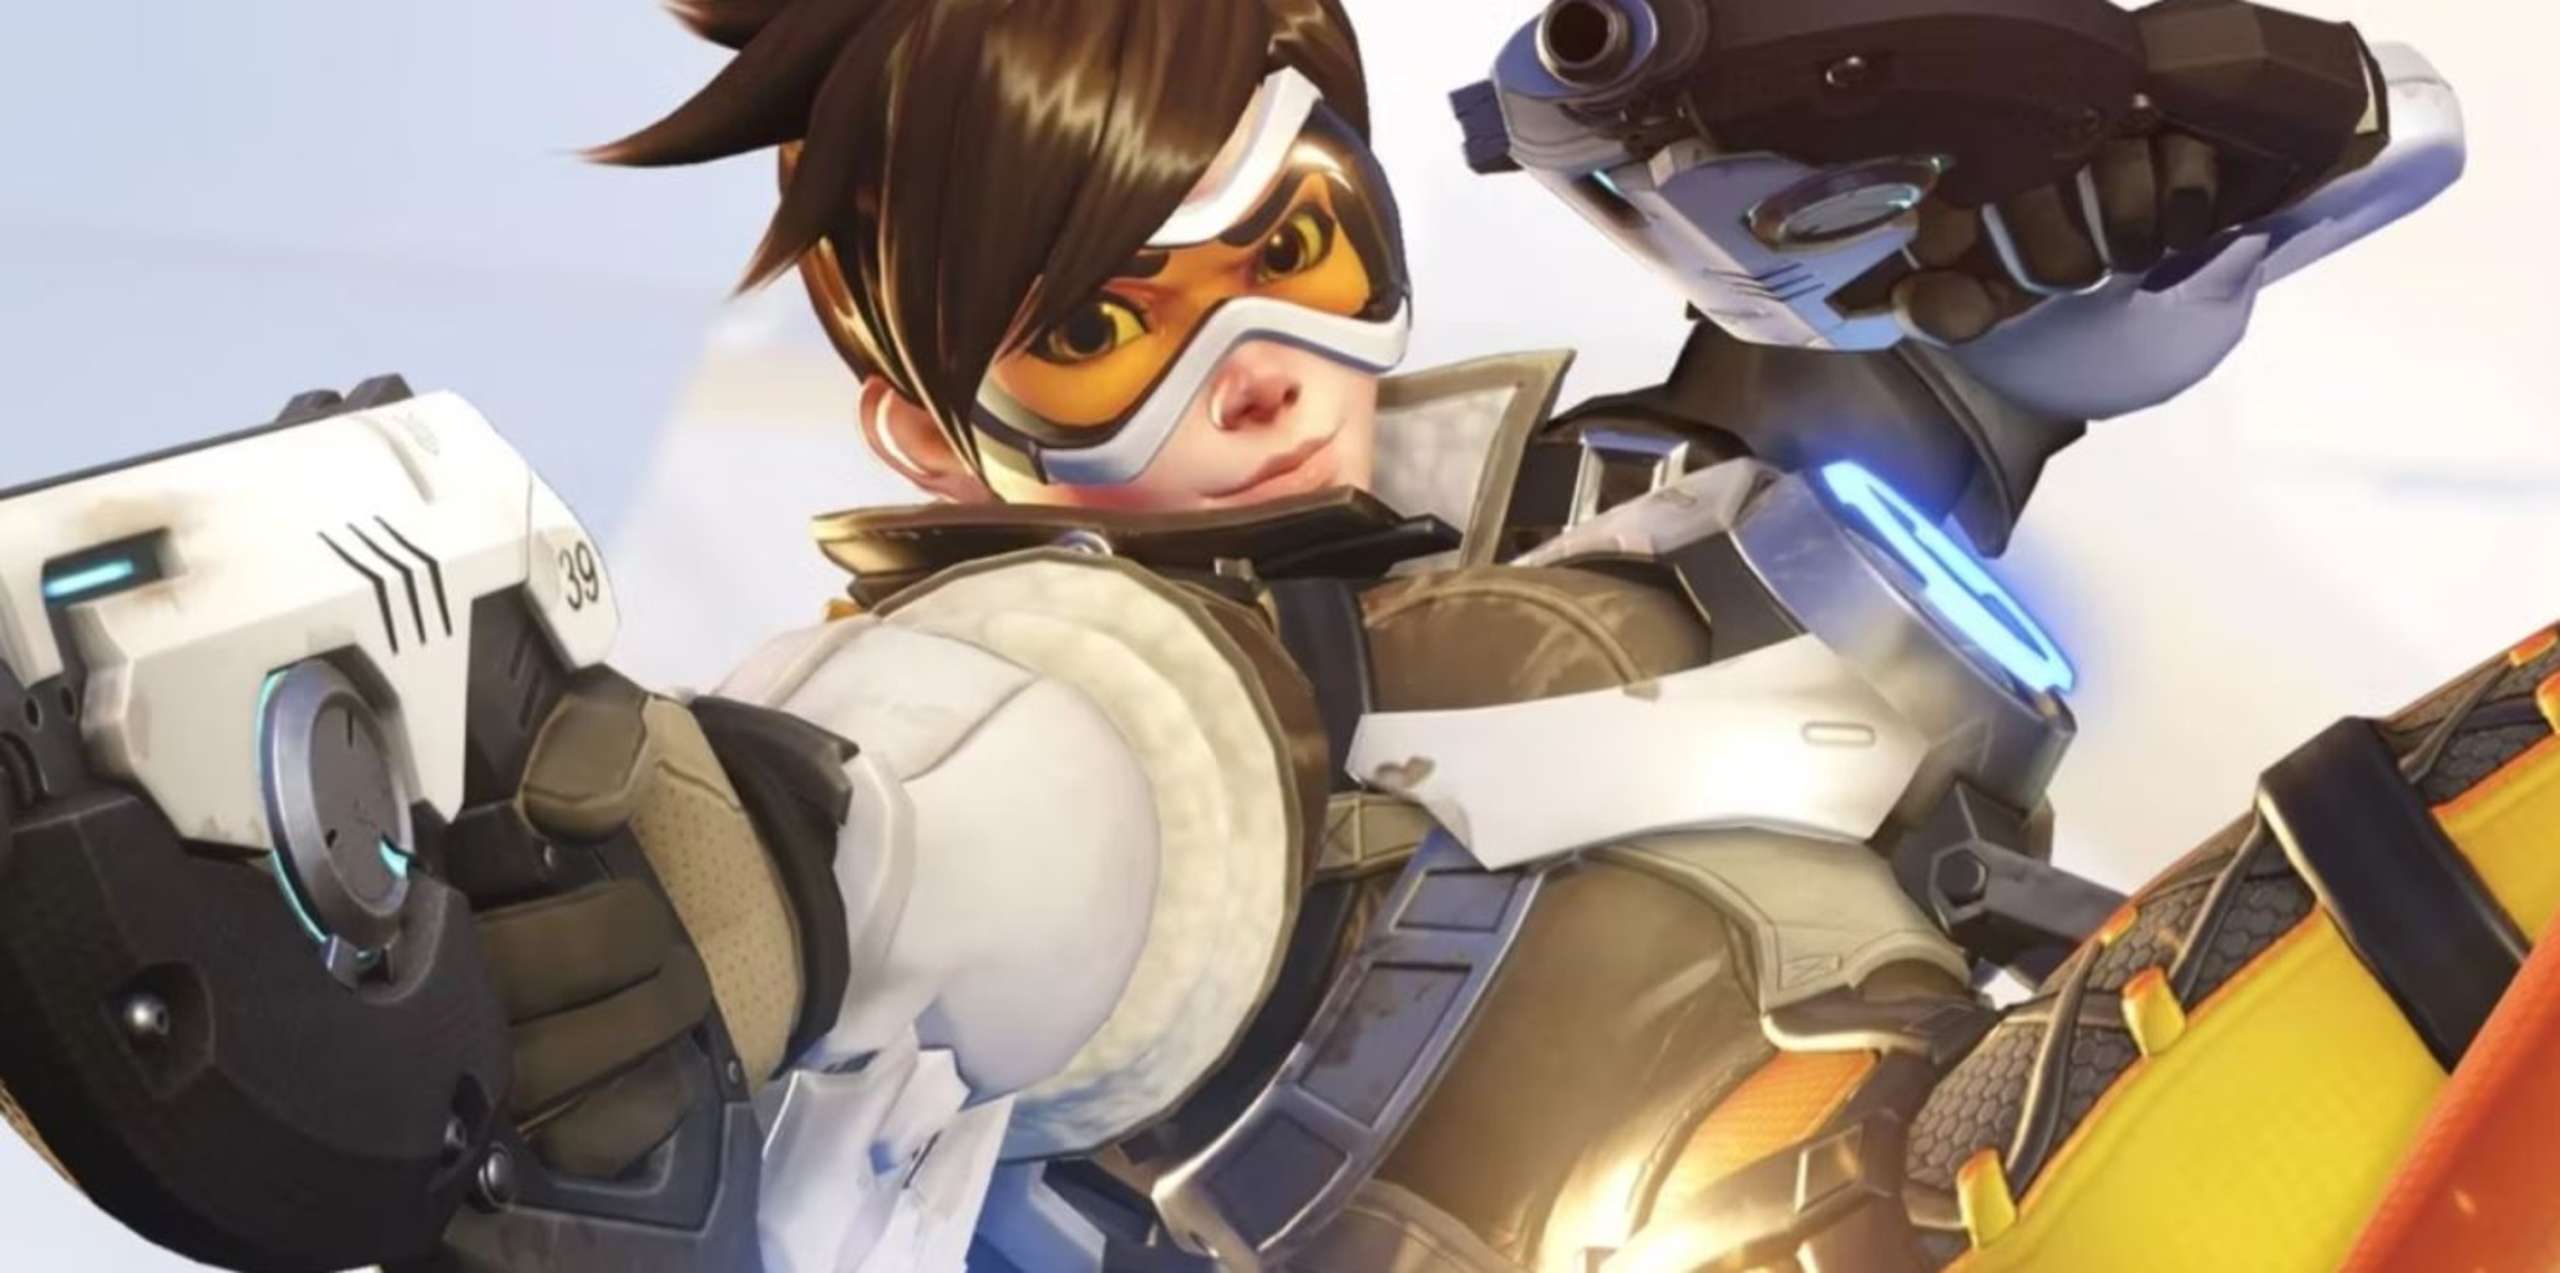 Although Overwatch 2 Has Replaced The Original And Is Now Free To Play, The Original Game Is Still Sold In Some Places